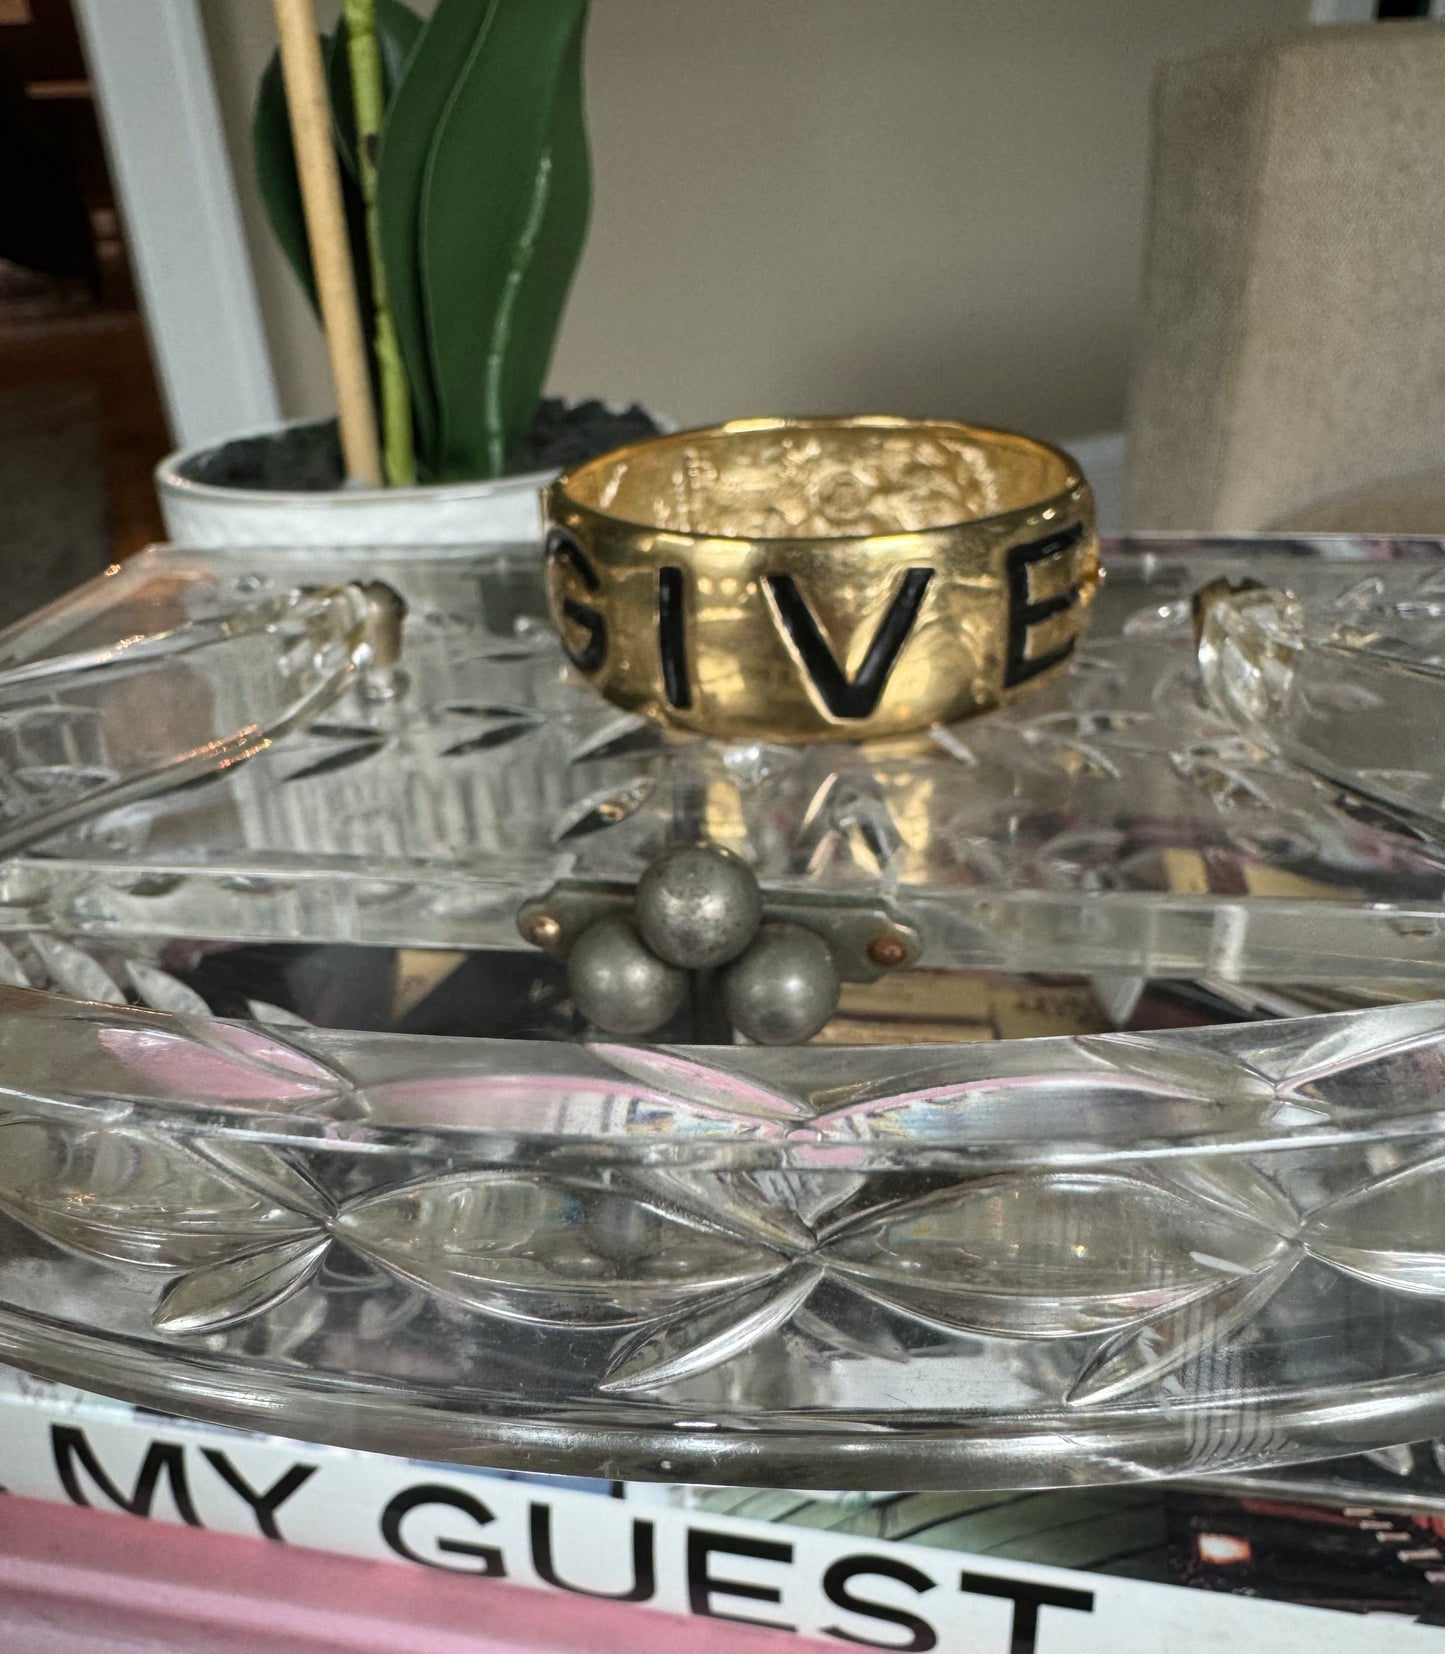 Wow Factor! Vintage Givenchy bangle bracelet. A true collectable statement piece!